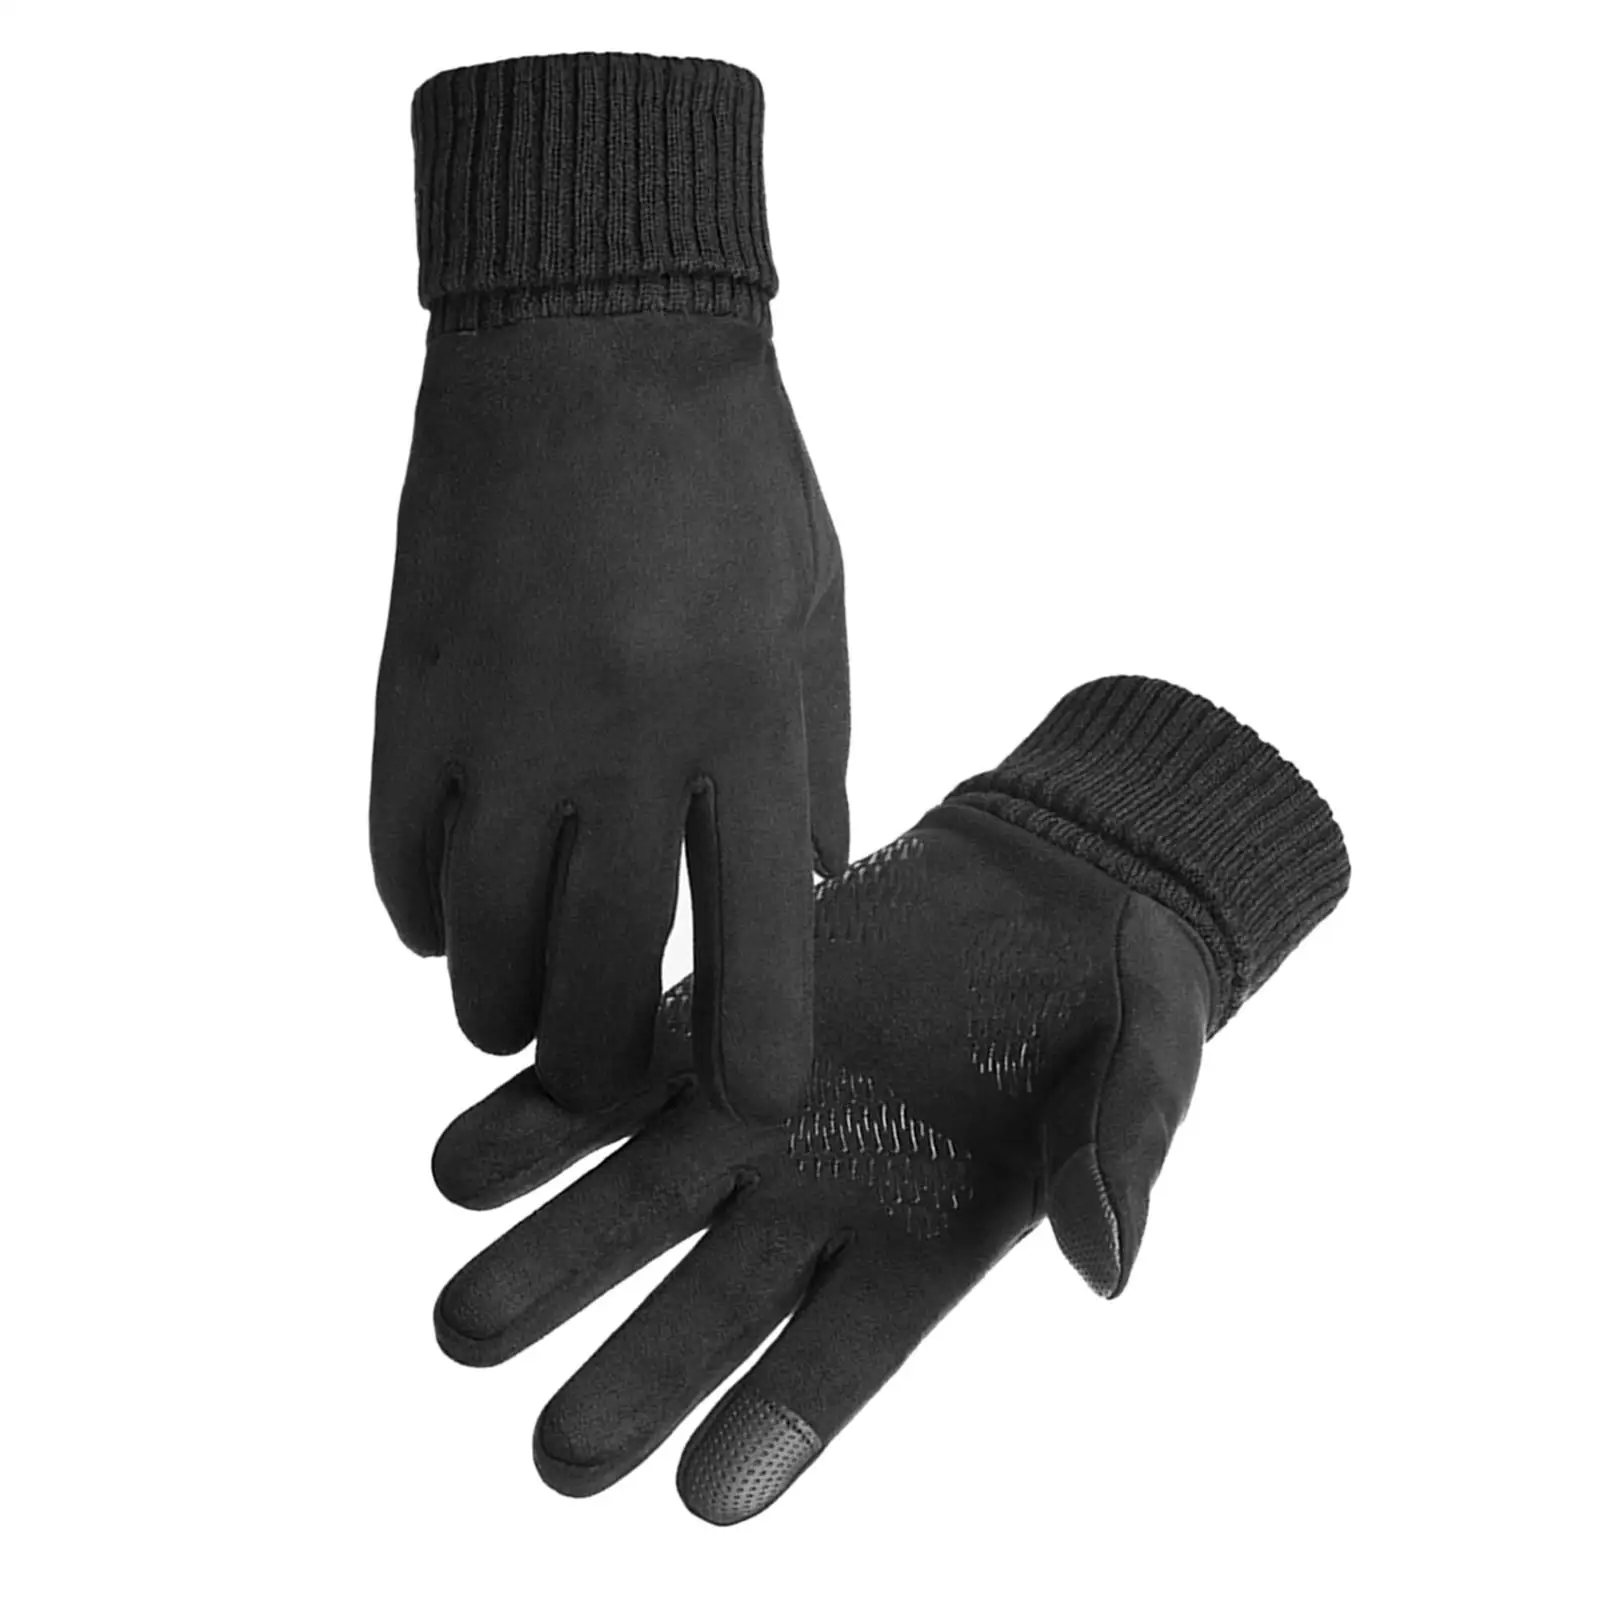 Winter Warm Gloves Liner Glove Comfortable Touch Screen Lightweight Full Finger Thermal Cycling Gloves Mens Running Hiking